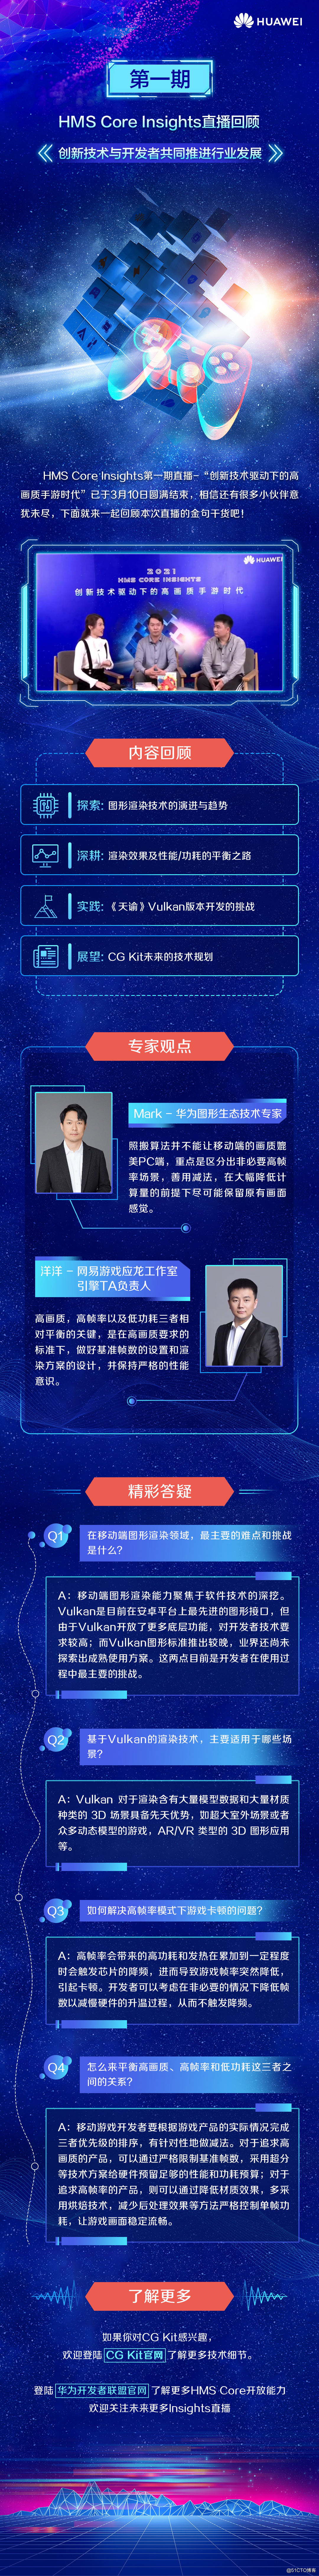 HMS Core Insights first phase of the live broadcast review-explain the profound things in a simple way, innovative technologies and developers to jointly promote the development of the industry